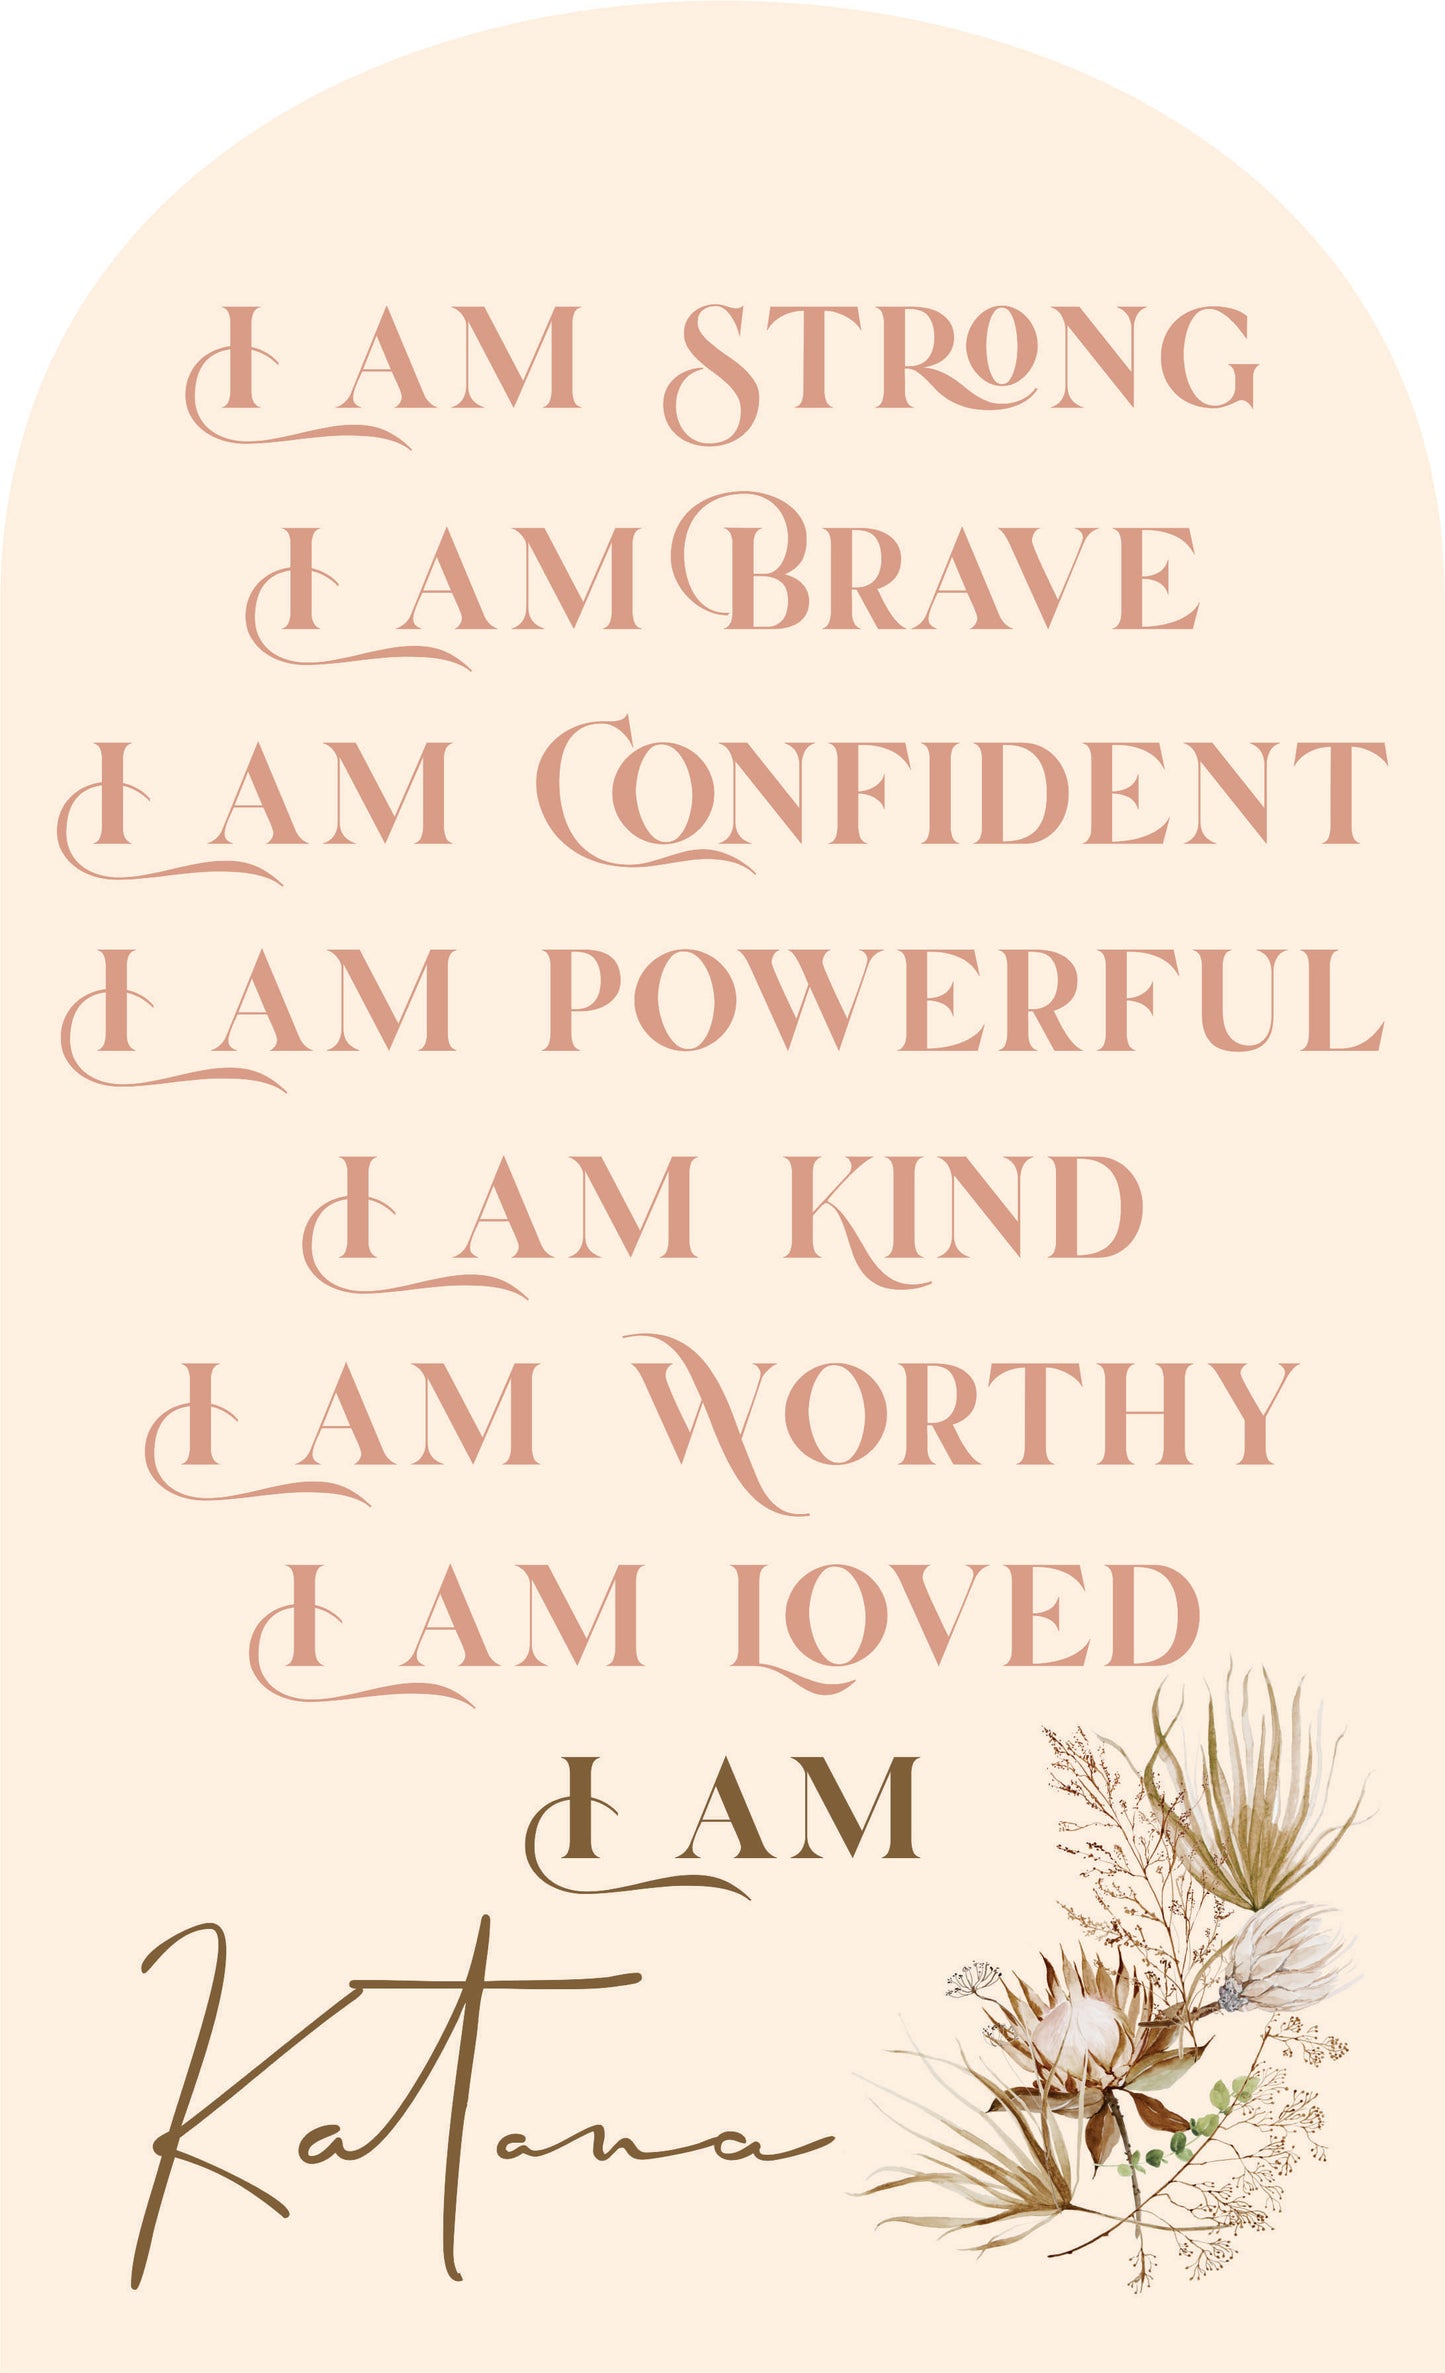 Boho Theme Affirmations and Quotes - Fabric Wall Decal